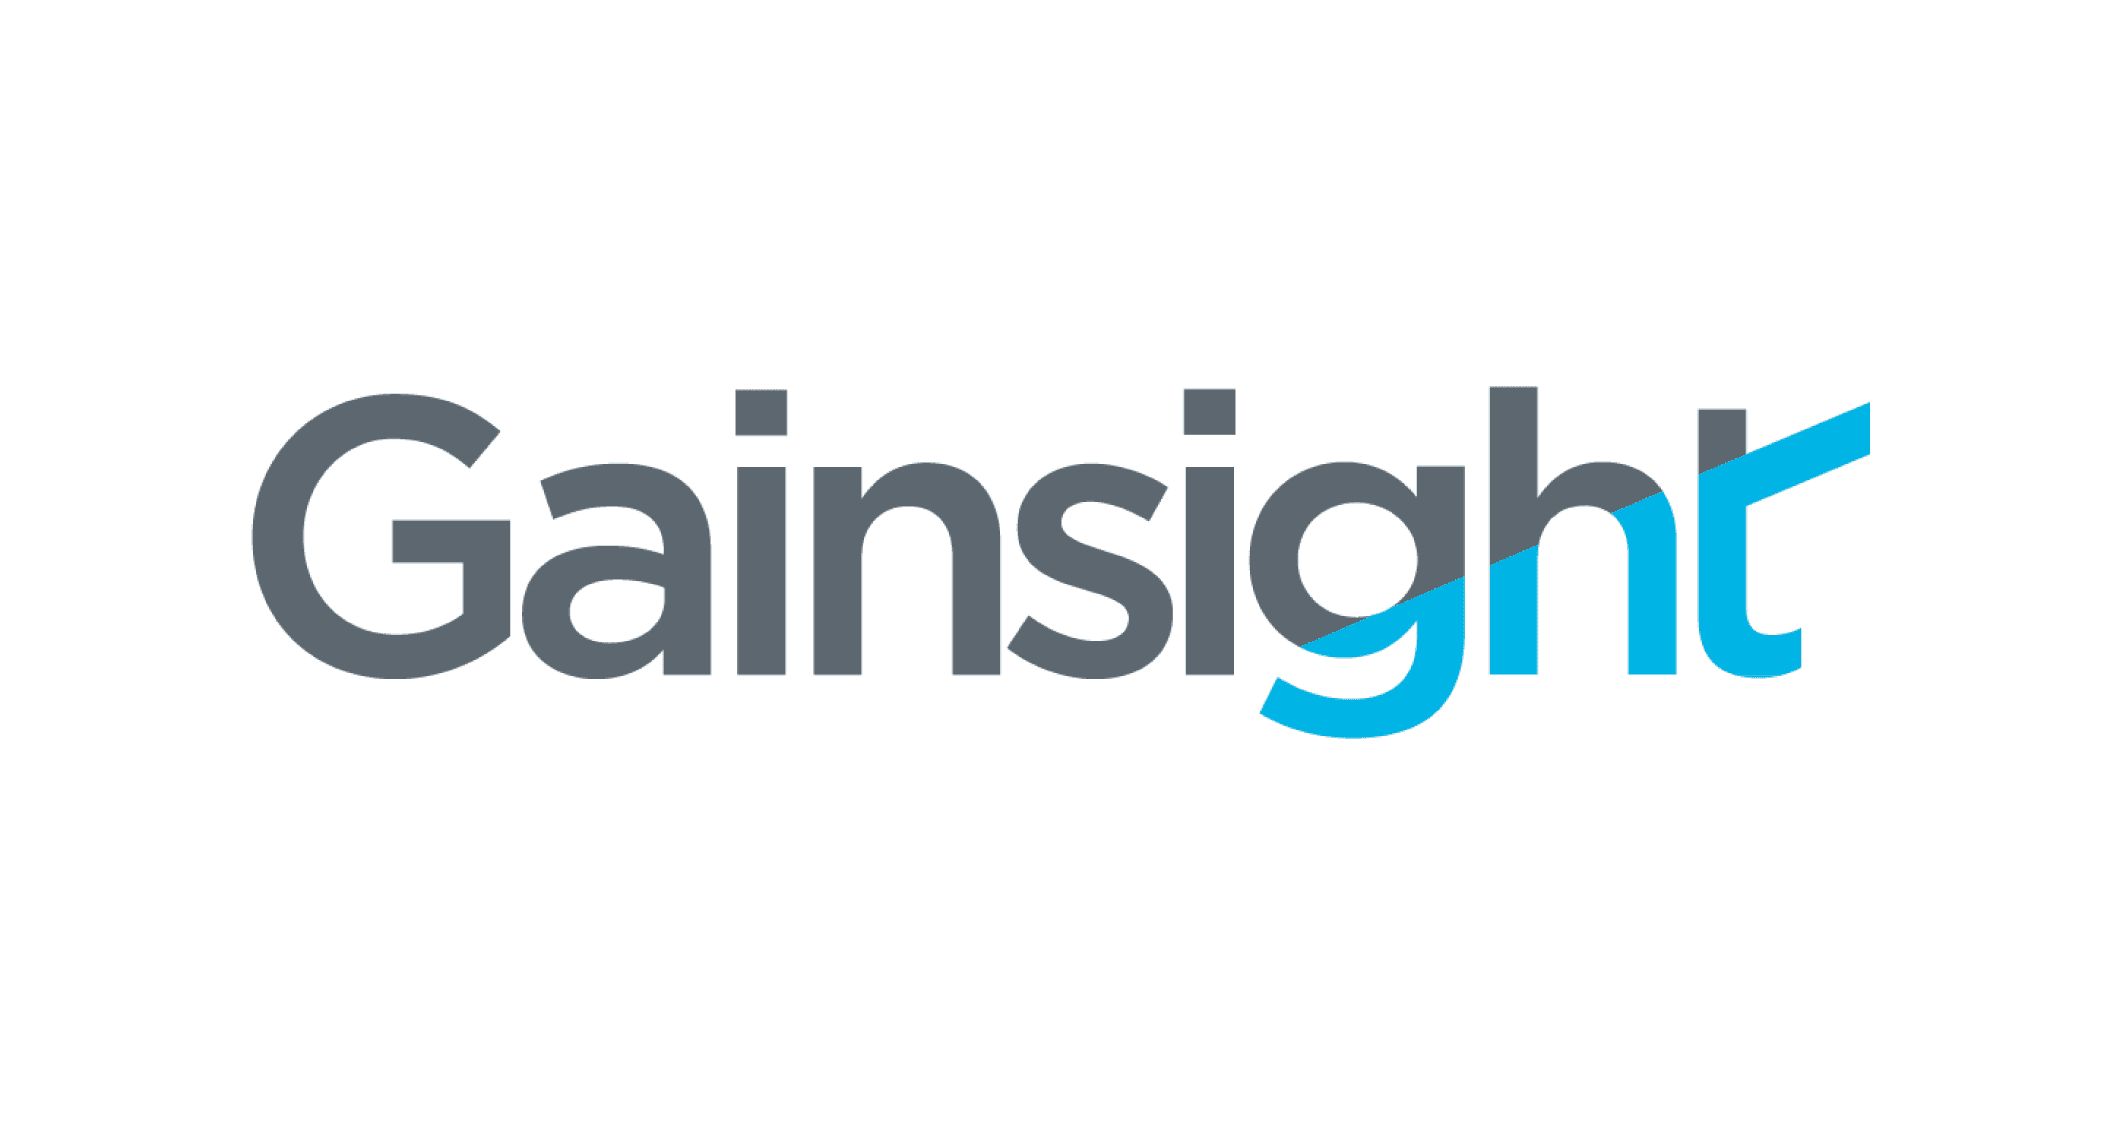 GAINSIGHT users